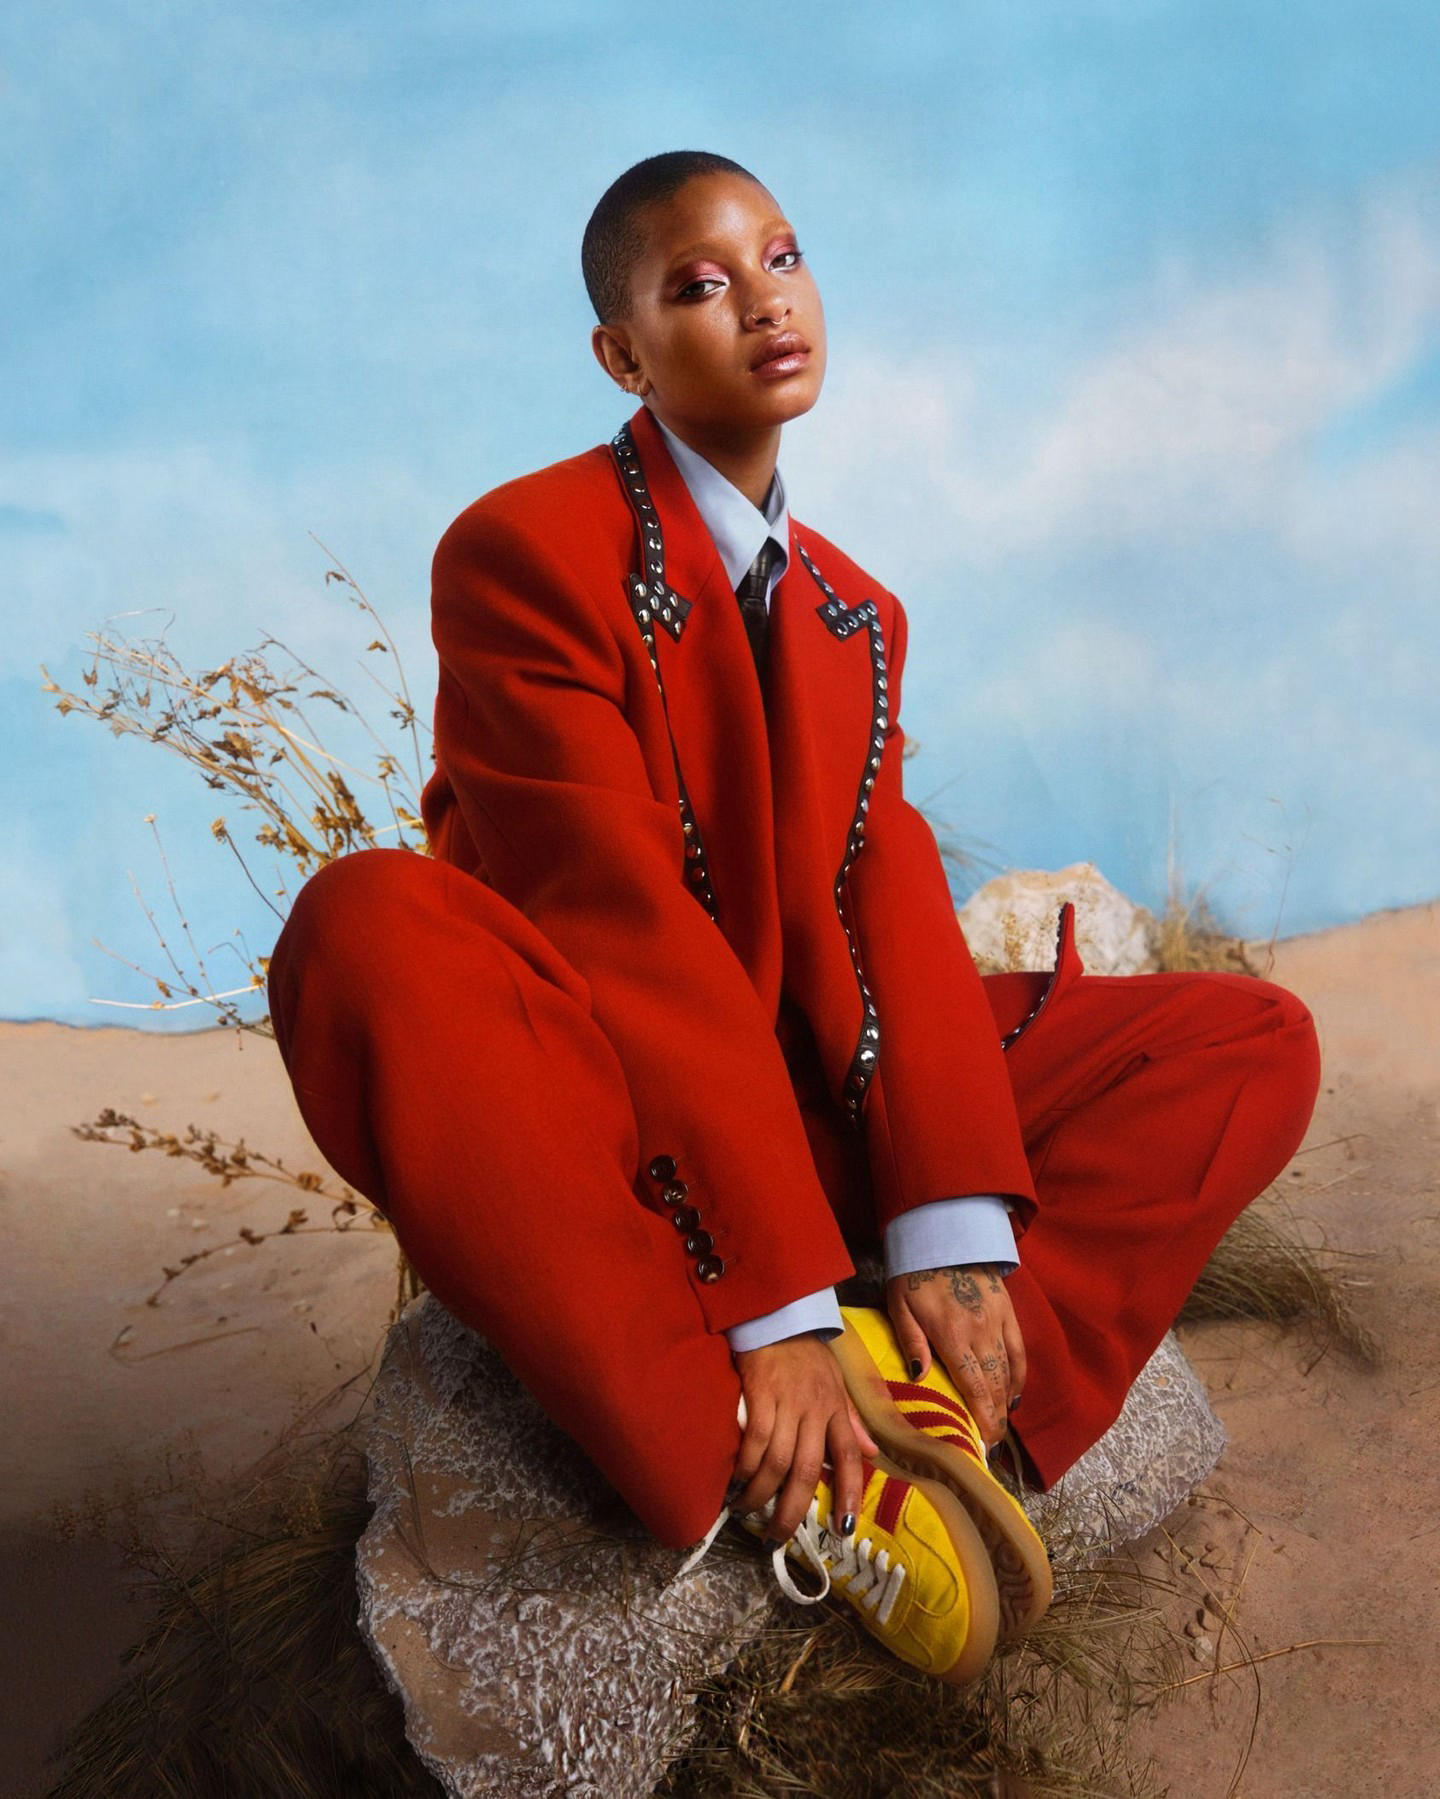 image  1 Captured in a sartorial look and adidas x Gucci Gazelle sneakers from the Exquisite Gucci collection